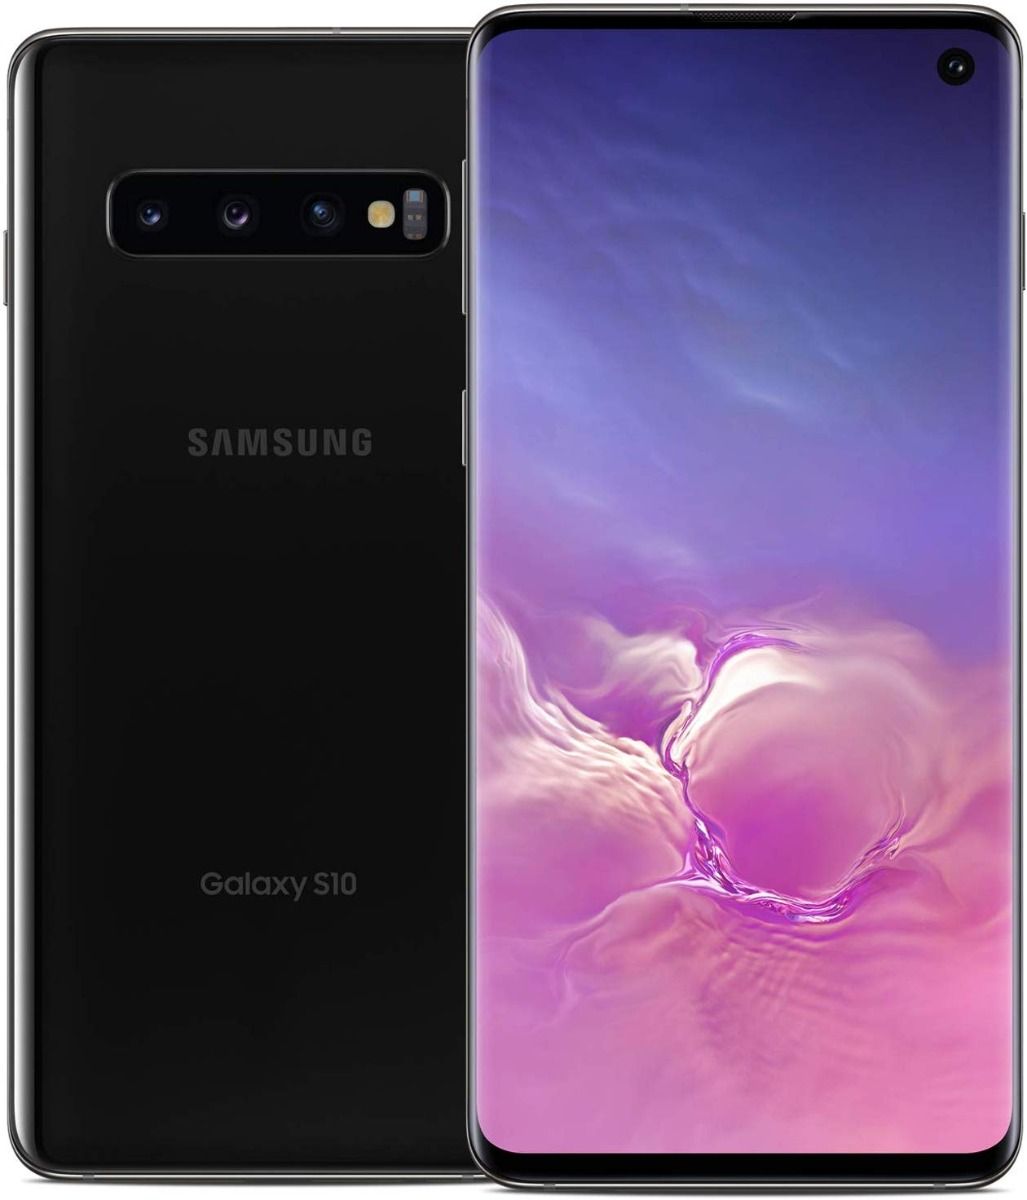 Samsung Galaxy S10 128GB 8GB Prism Black - New Case, Glass Screen Protector & Shipping  (Like New)